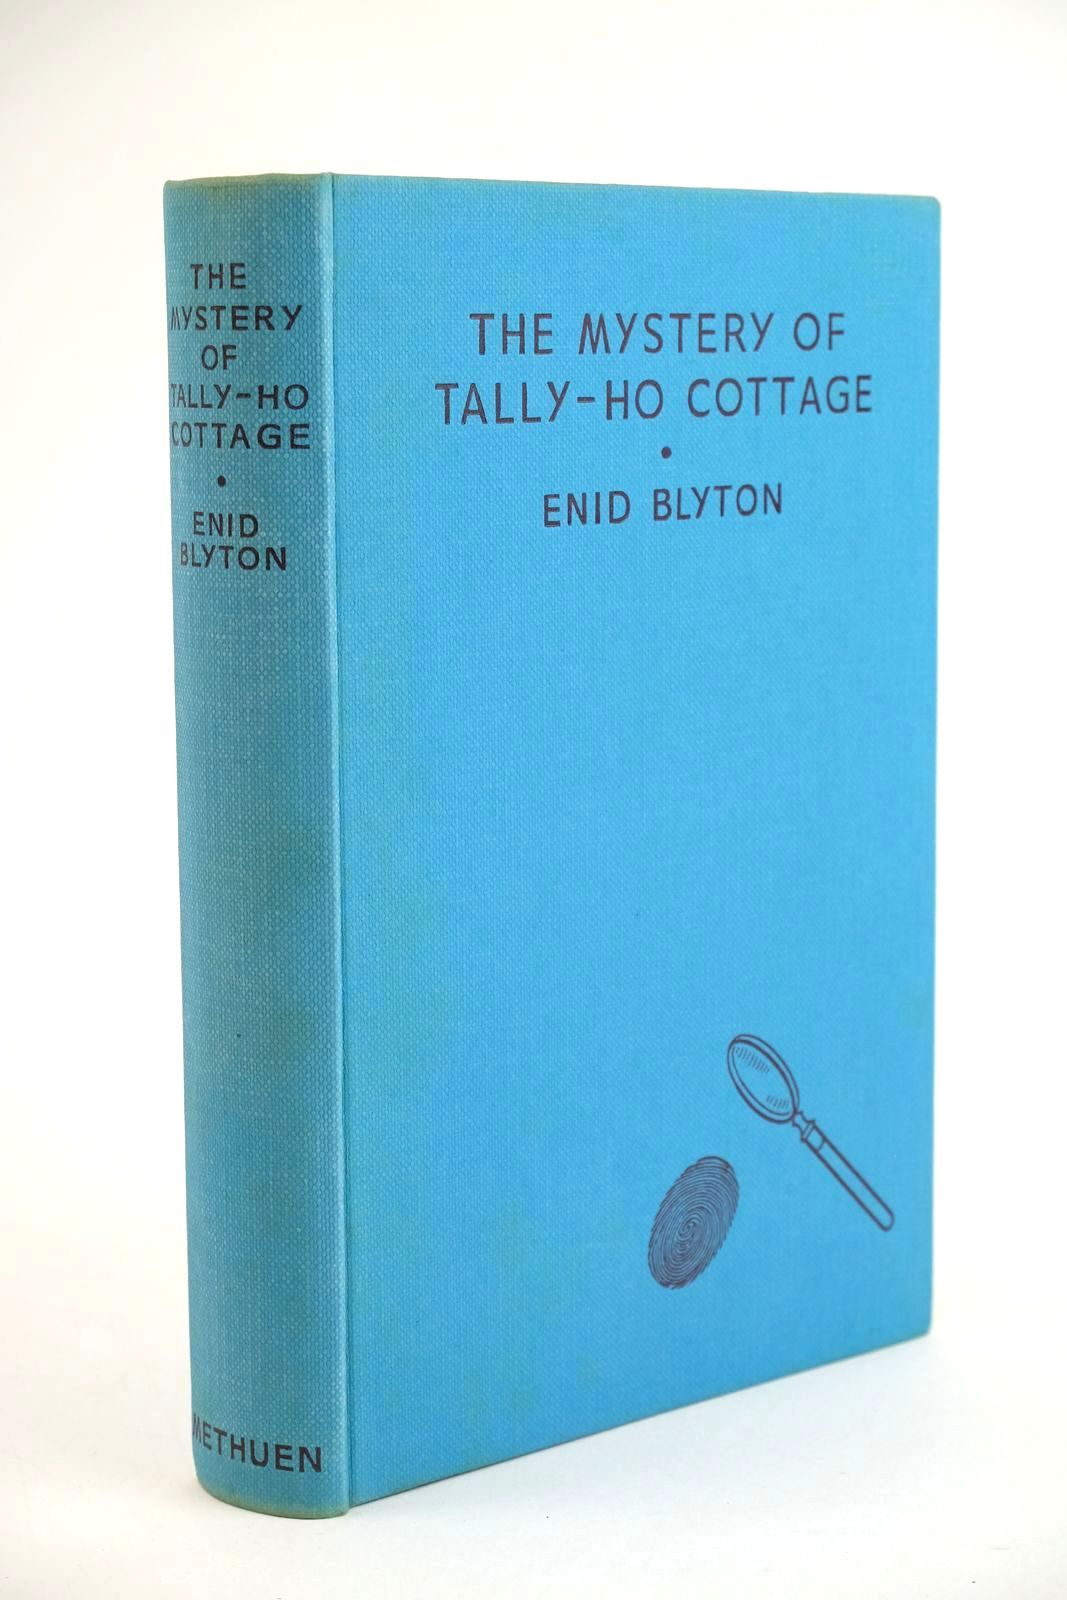 Photo of THE MYSTERY OF TALLY-HO COTTAGE written by Blyton, Enid illustrated by Evans, Treyer published by Methuen & Co. Ltd. (STOCK CODE: 1323589)  for sale by Stella & Rose's Books